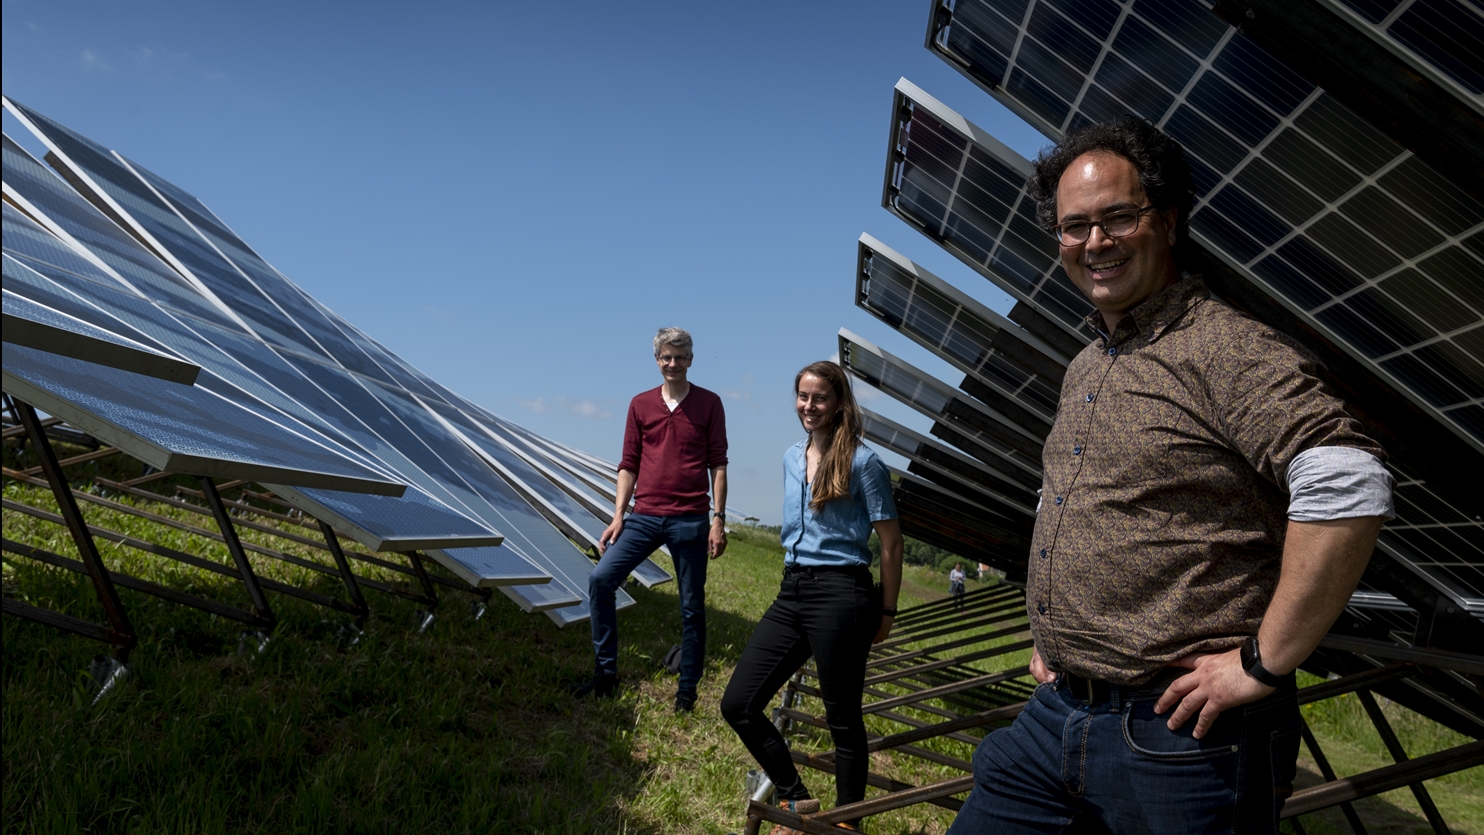 An impression of the test set-up of the solar farm at Nauerna in Zaanstad